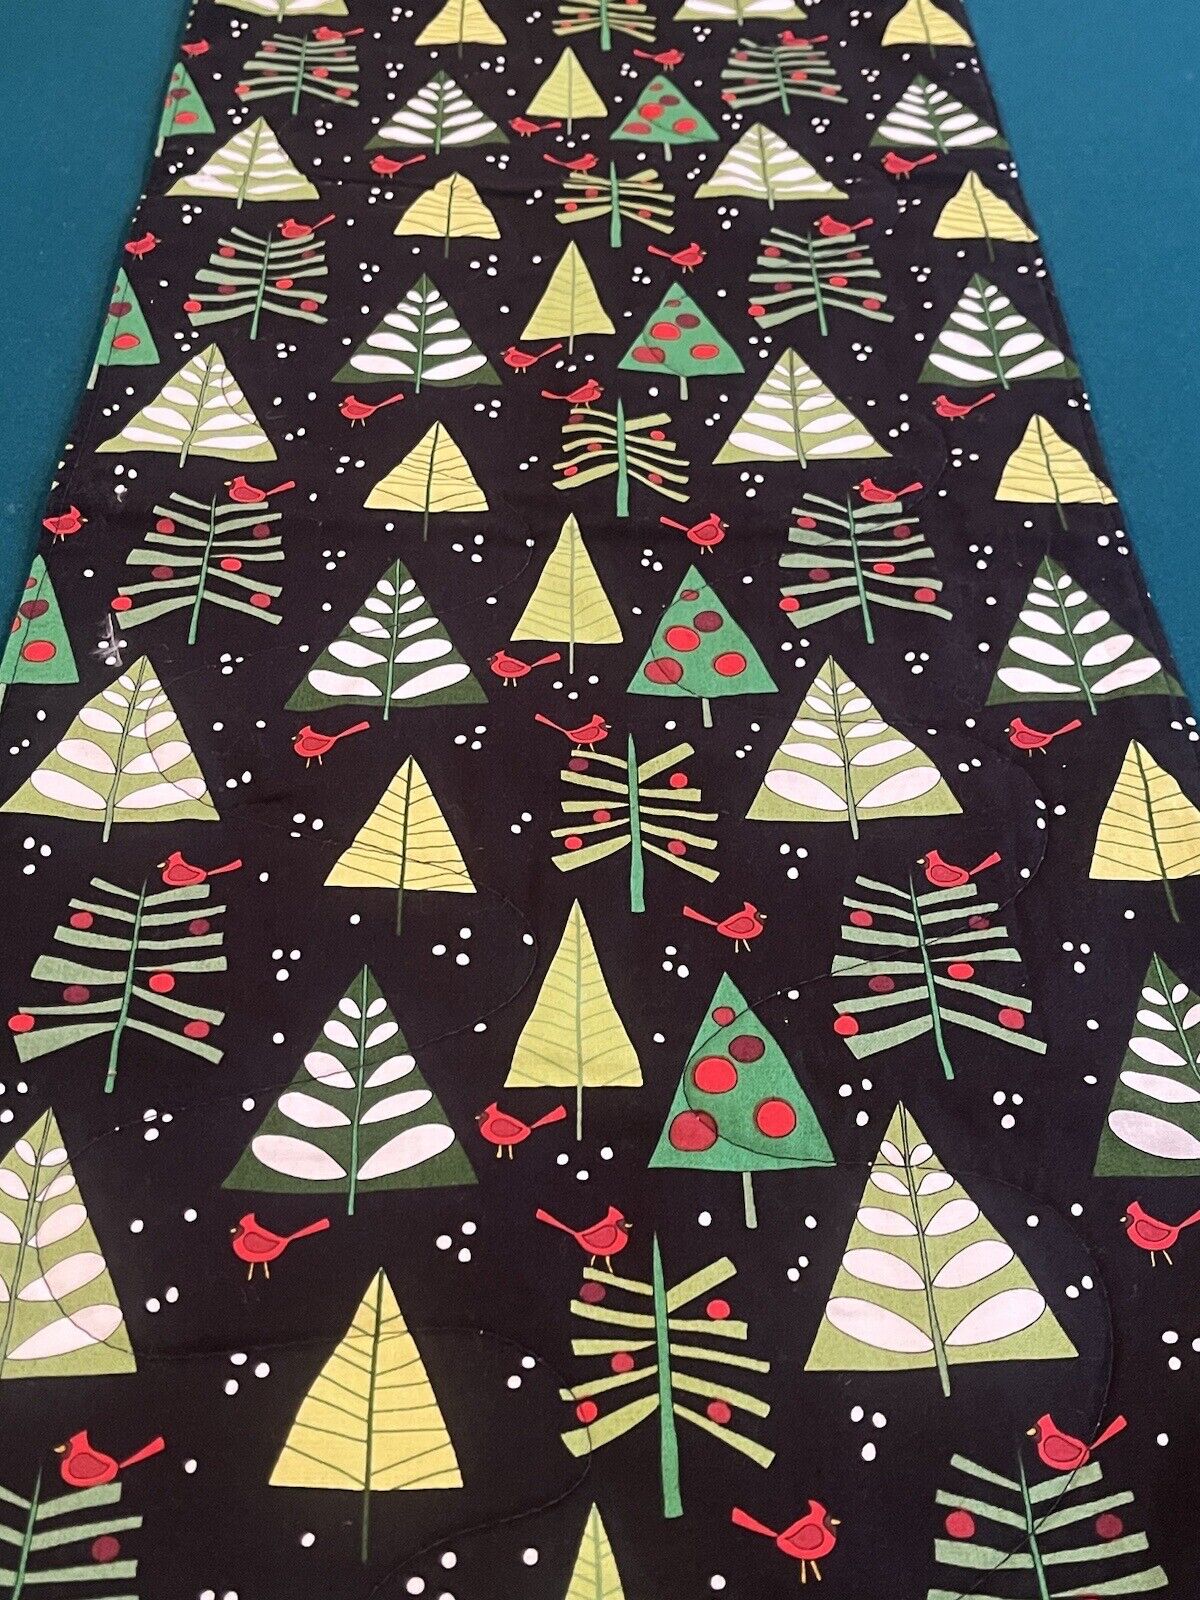 REVERSIBLE DOUBLE SIDED CHRISTMAS TABLE RUNNER BLACK NEON GREEN TREES Snowflakes